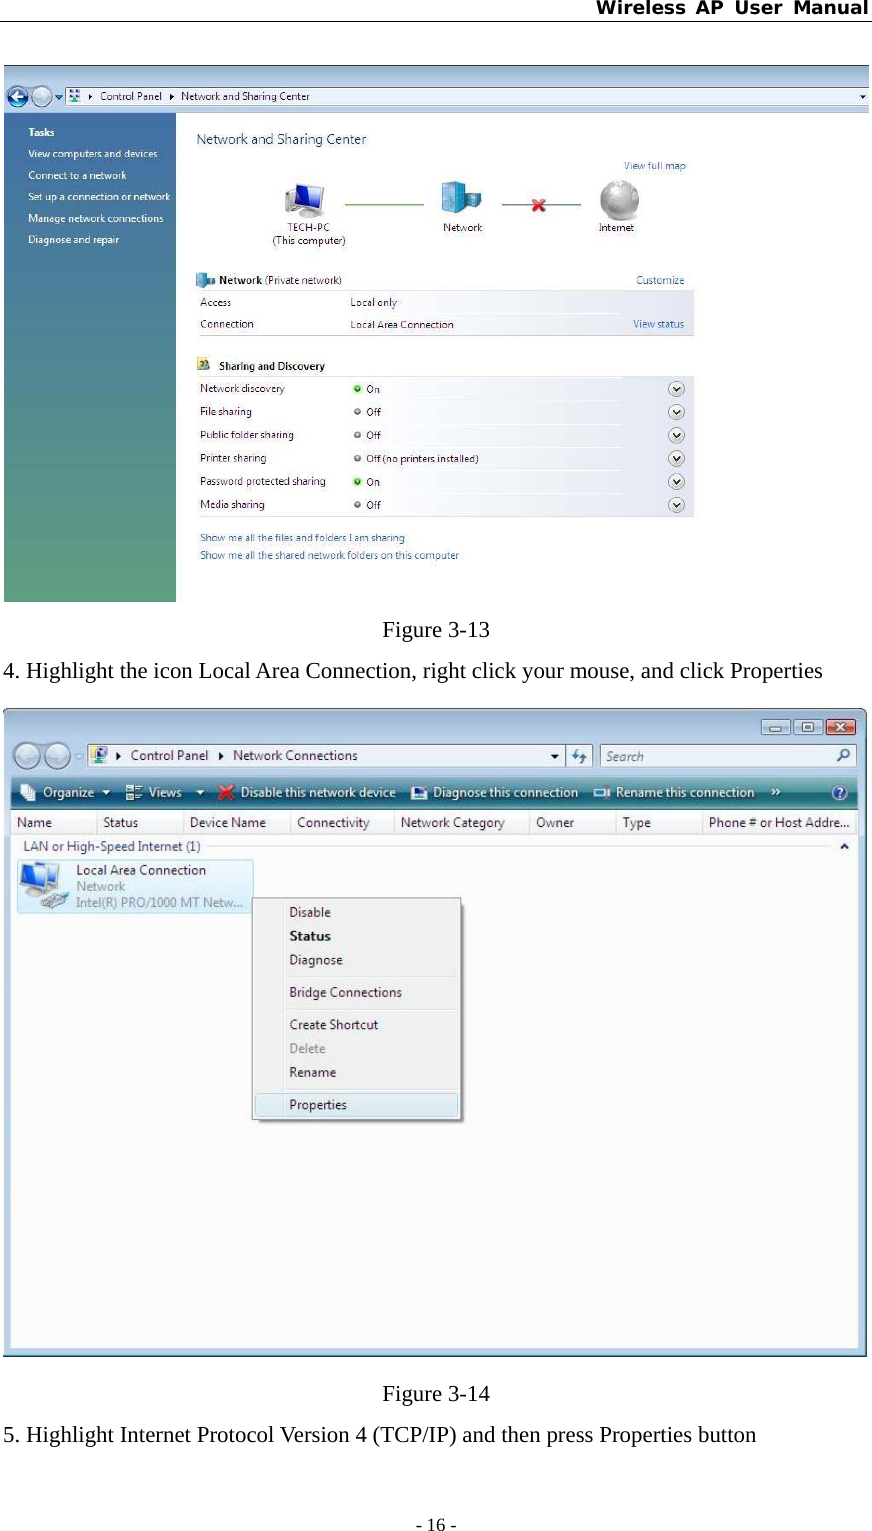 Wireless AP User Manual - 16 -   Figure 3-13 4. Highlight the icon Local Area Connection, right click your mouse, and click Properties  Figure 3-14 5. Highlight Internet Protocol Version 4 (TCP/IP) and then press Properties button 